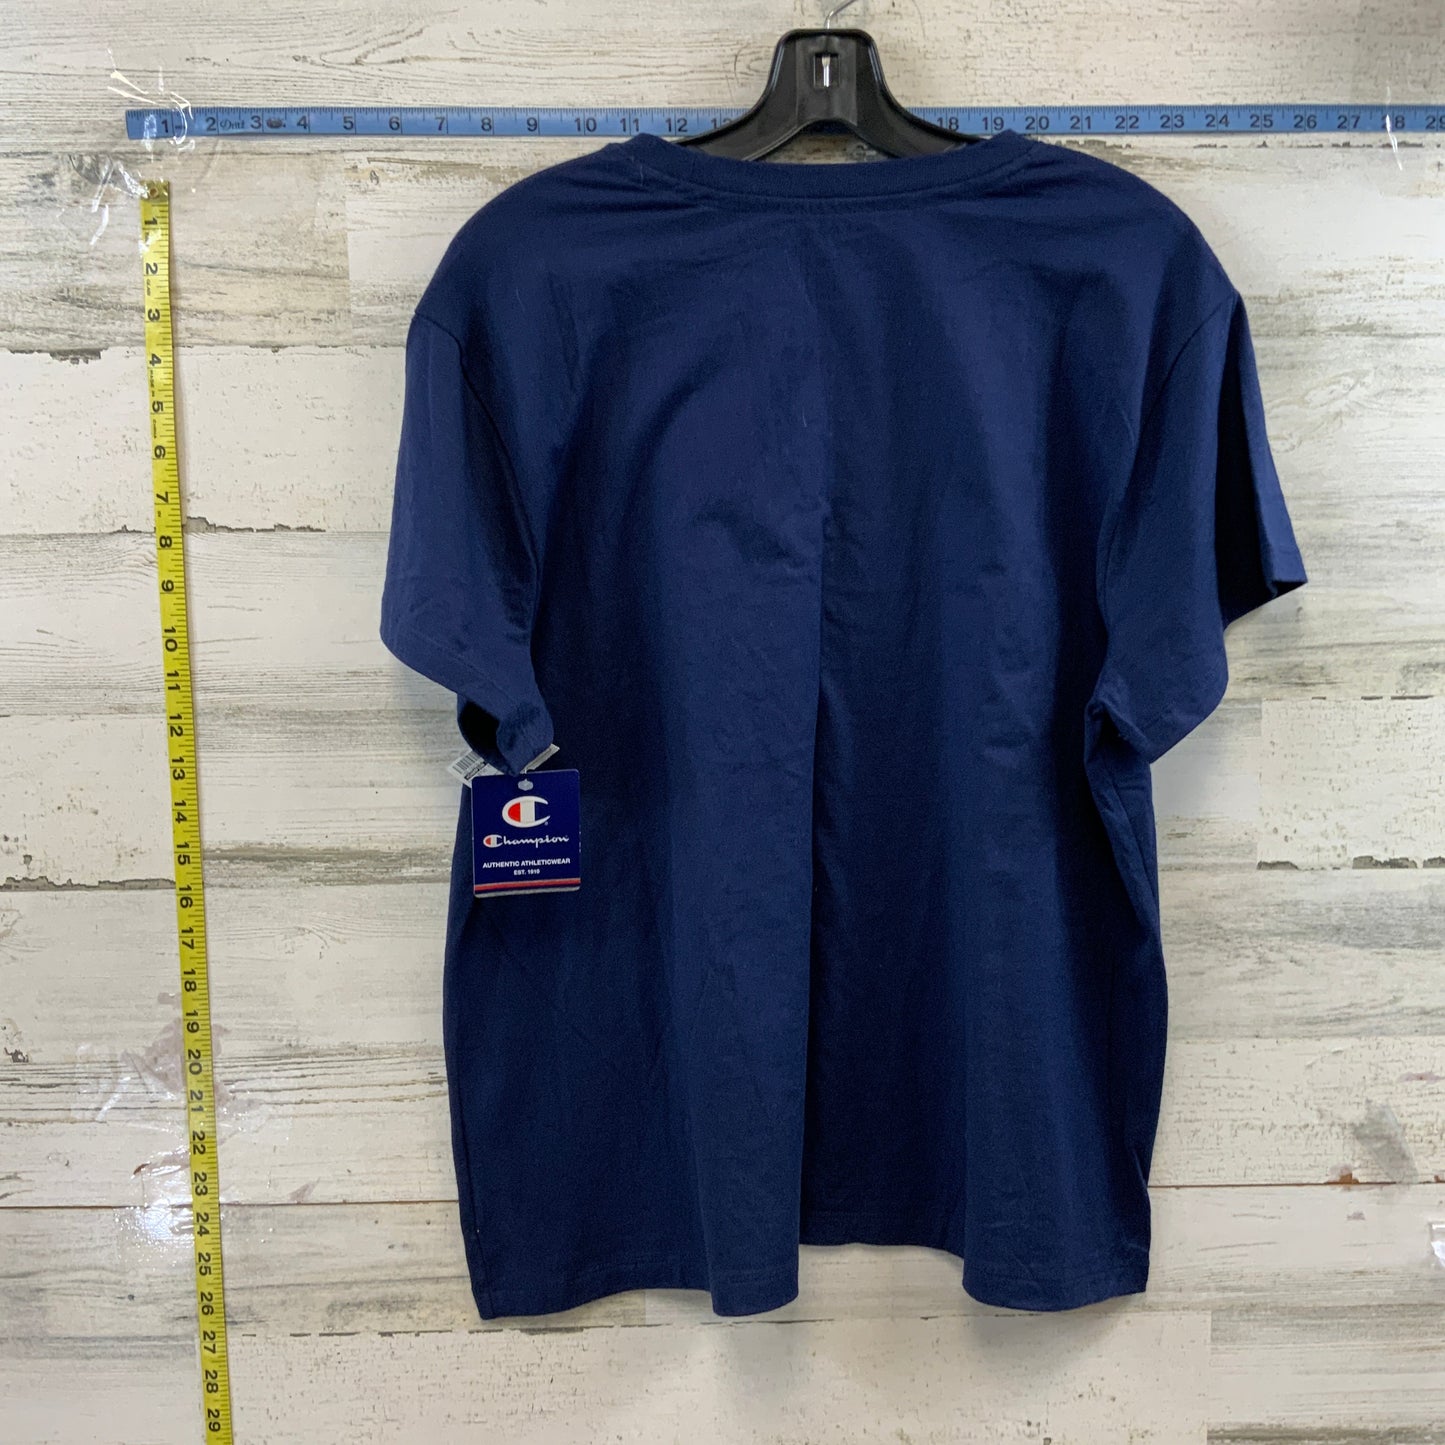 Athletic Top Short Sleeve By Champion  Size: 2x